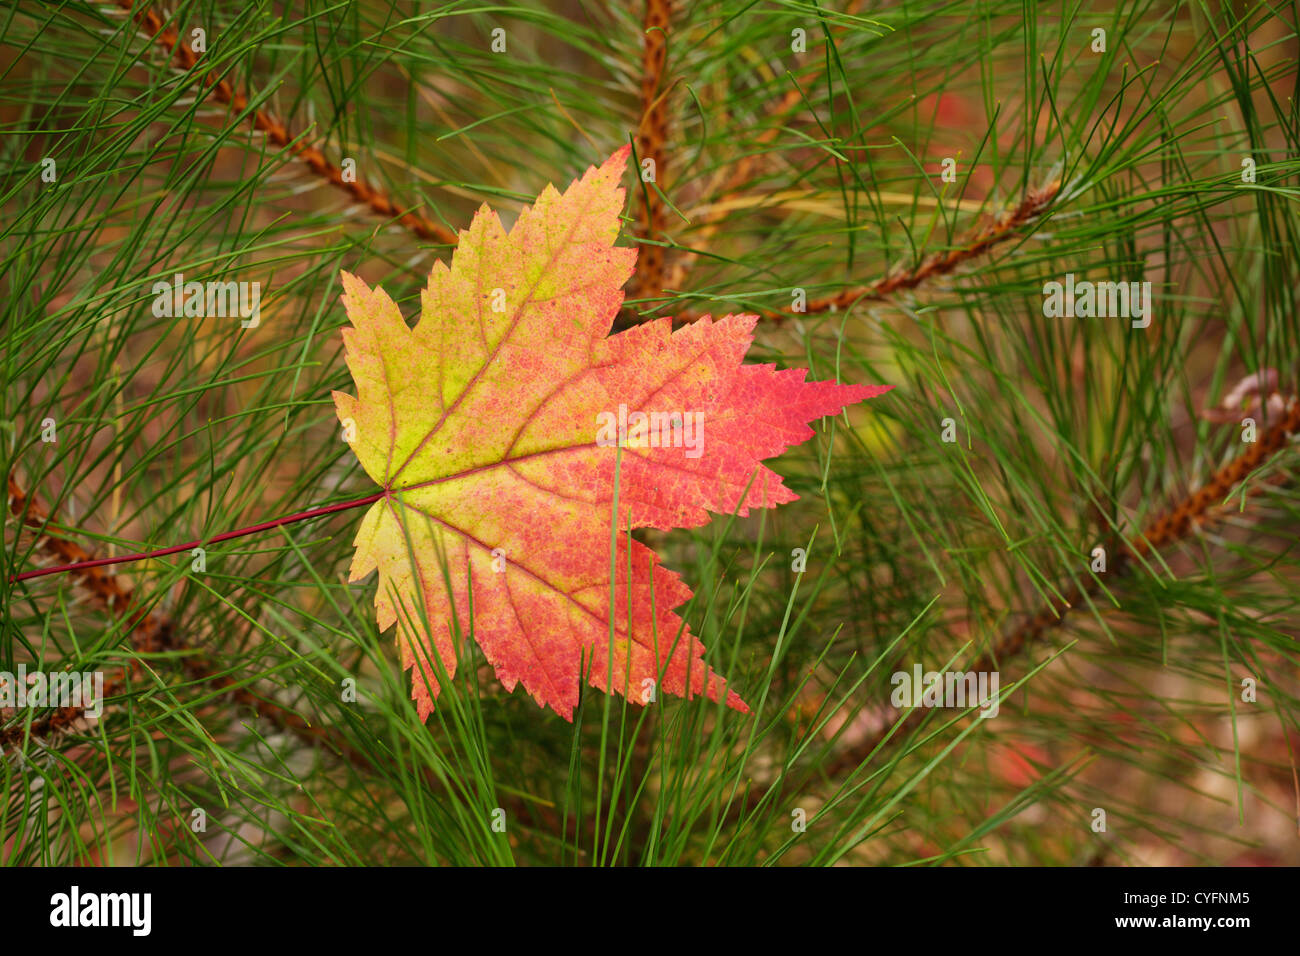 A maple leaf turned color in the autumn. Stock Photo